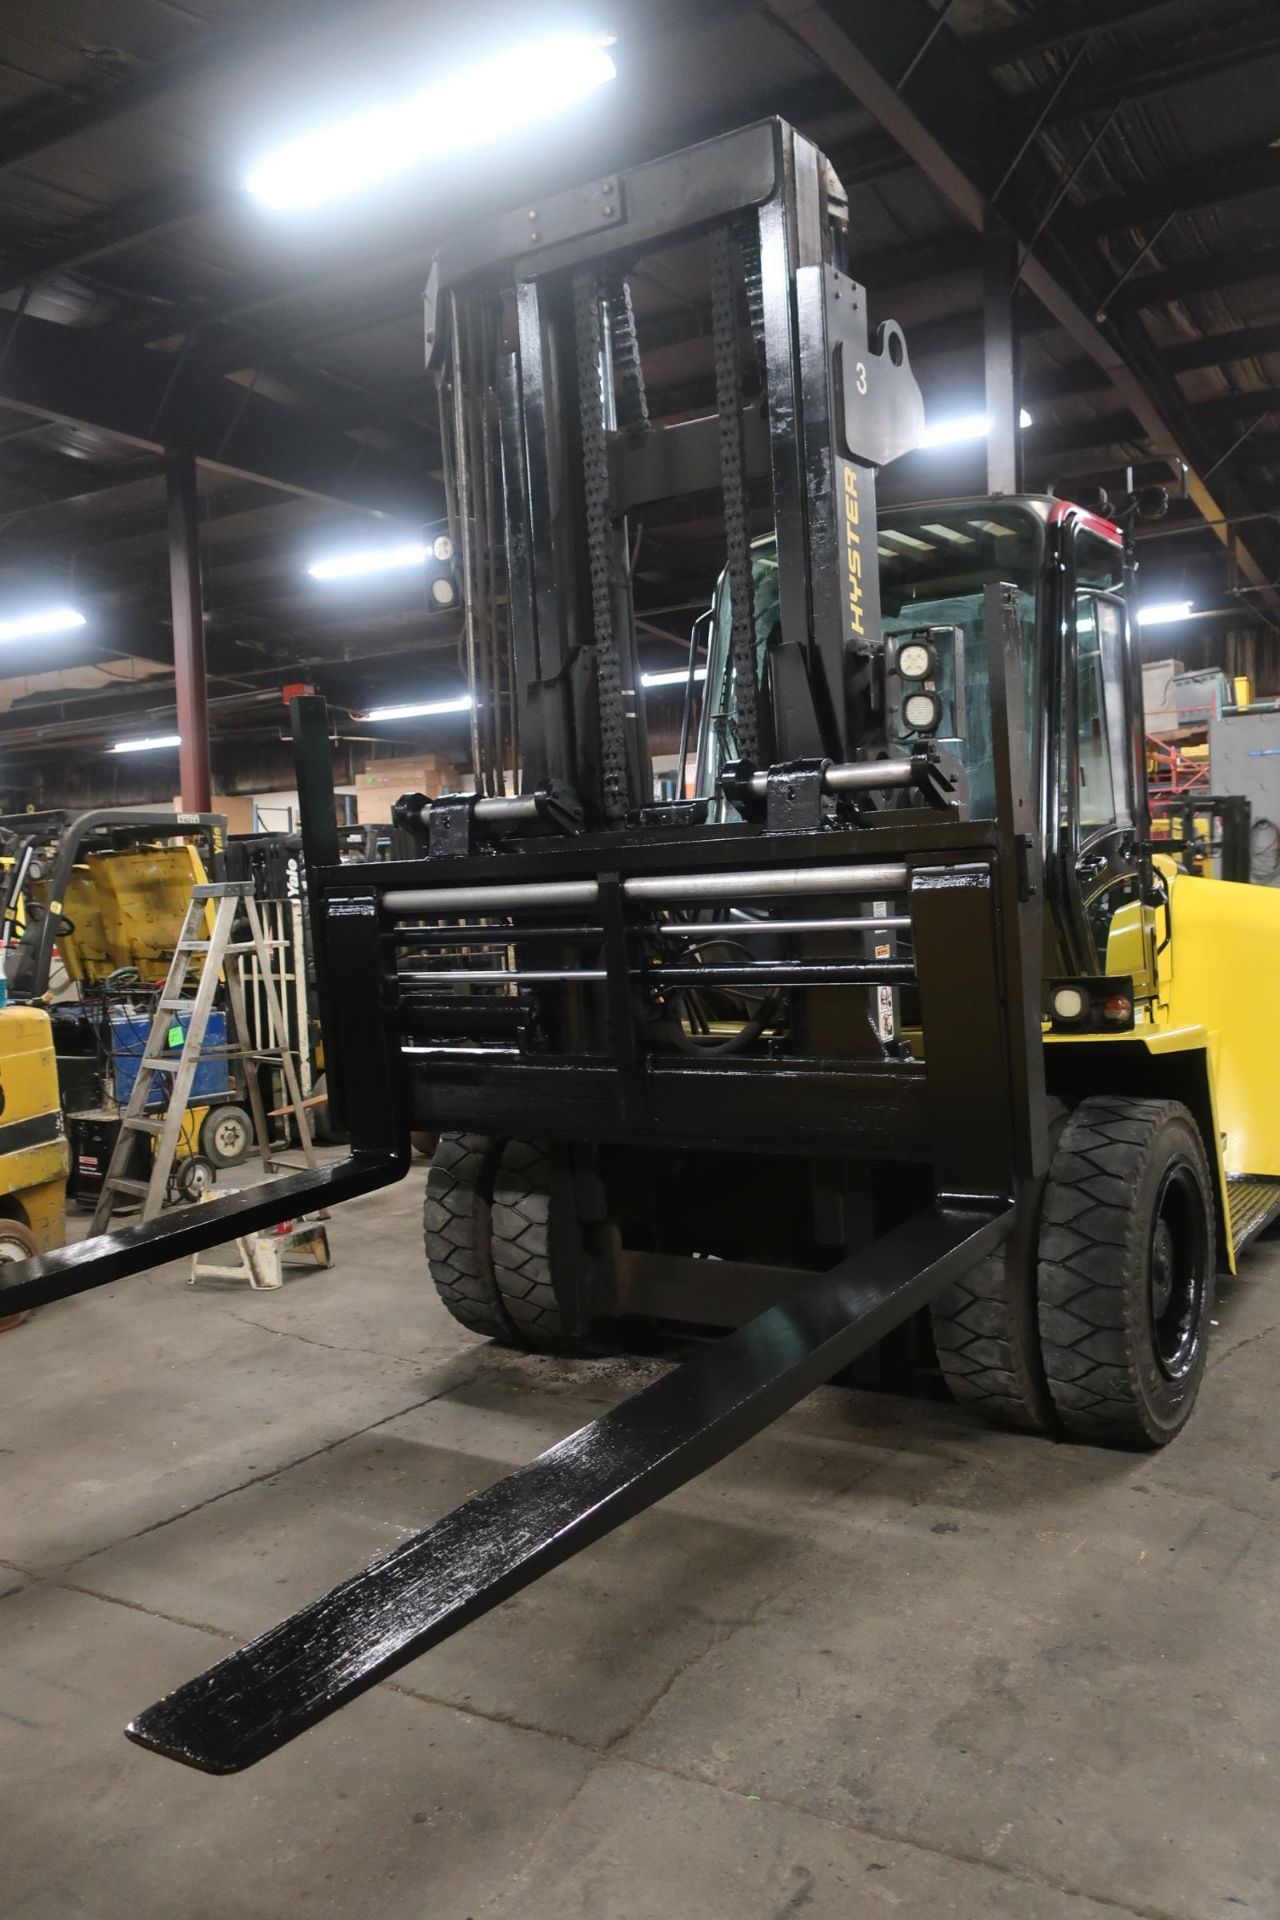 FREE CUSTOMS - 2013 Hyster 28000lbs OUTDOOR Forklift with 8' FORKS Diesel with Fork Positioner - Image 3 of 6